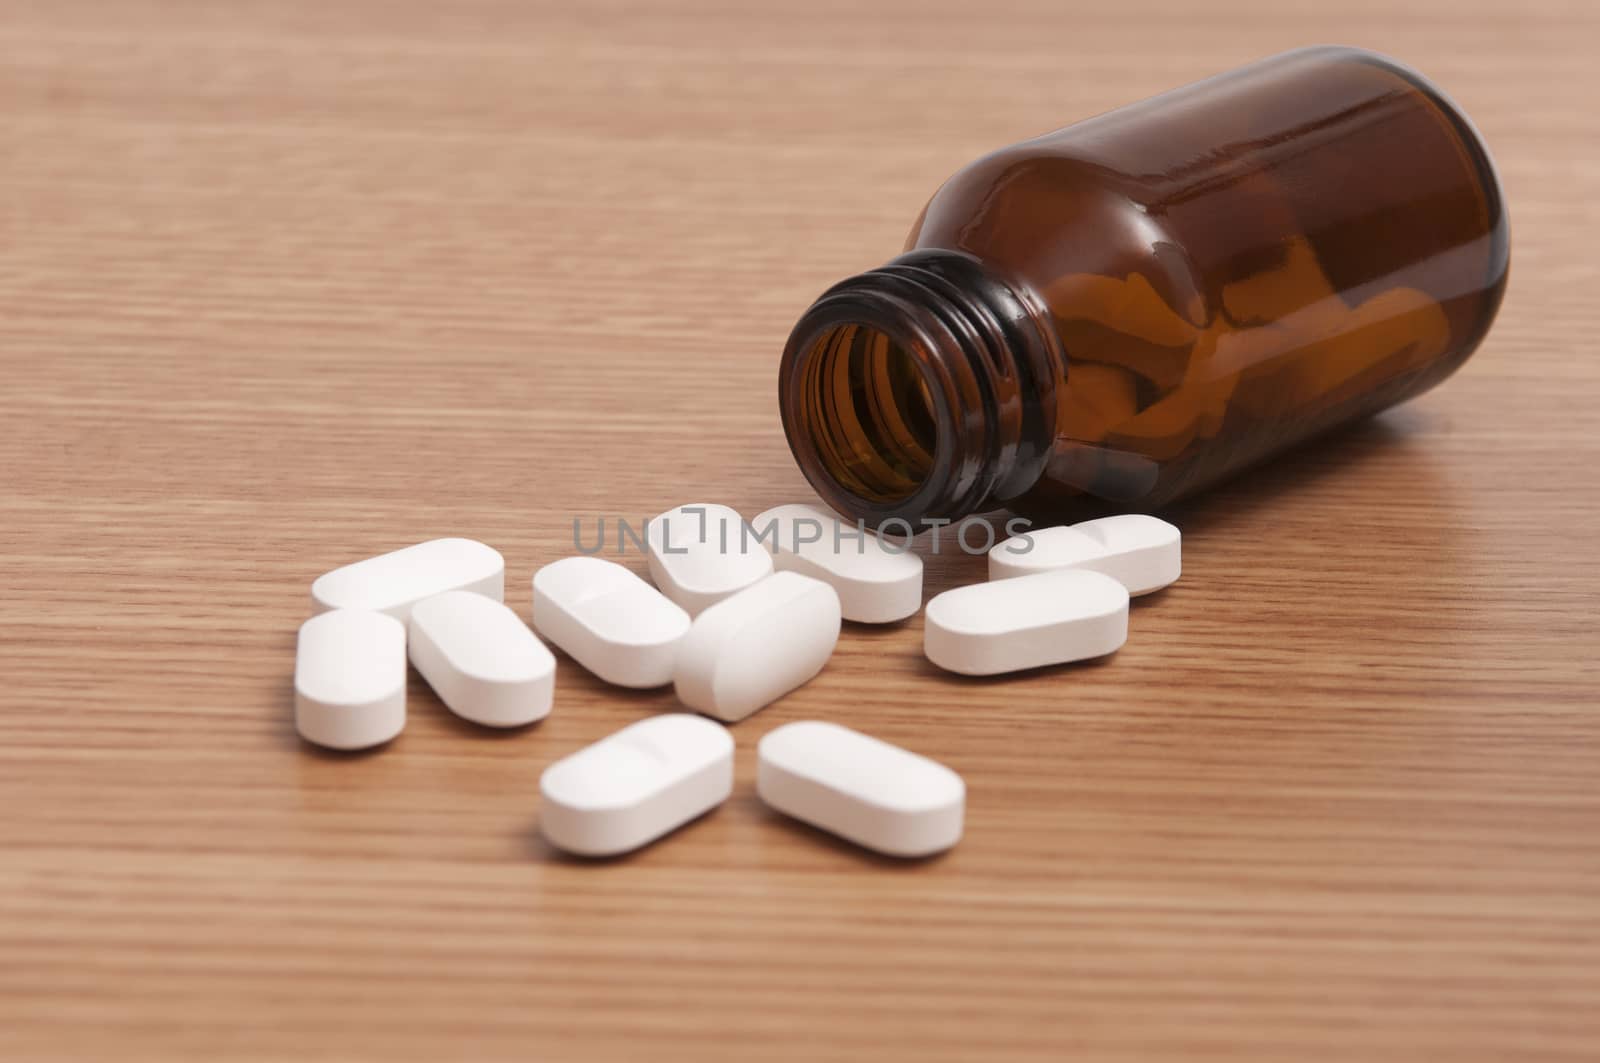 Some capsules and pills in a bottle on the table